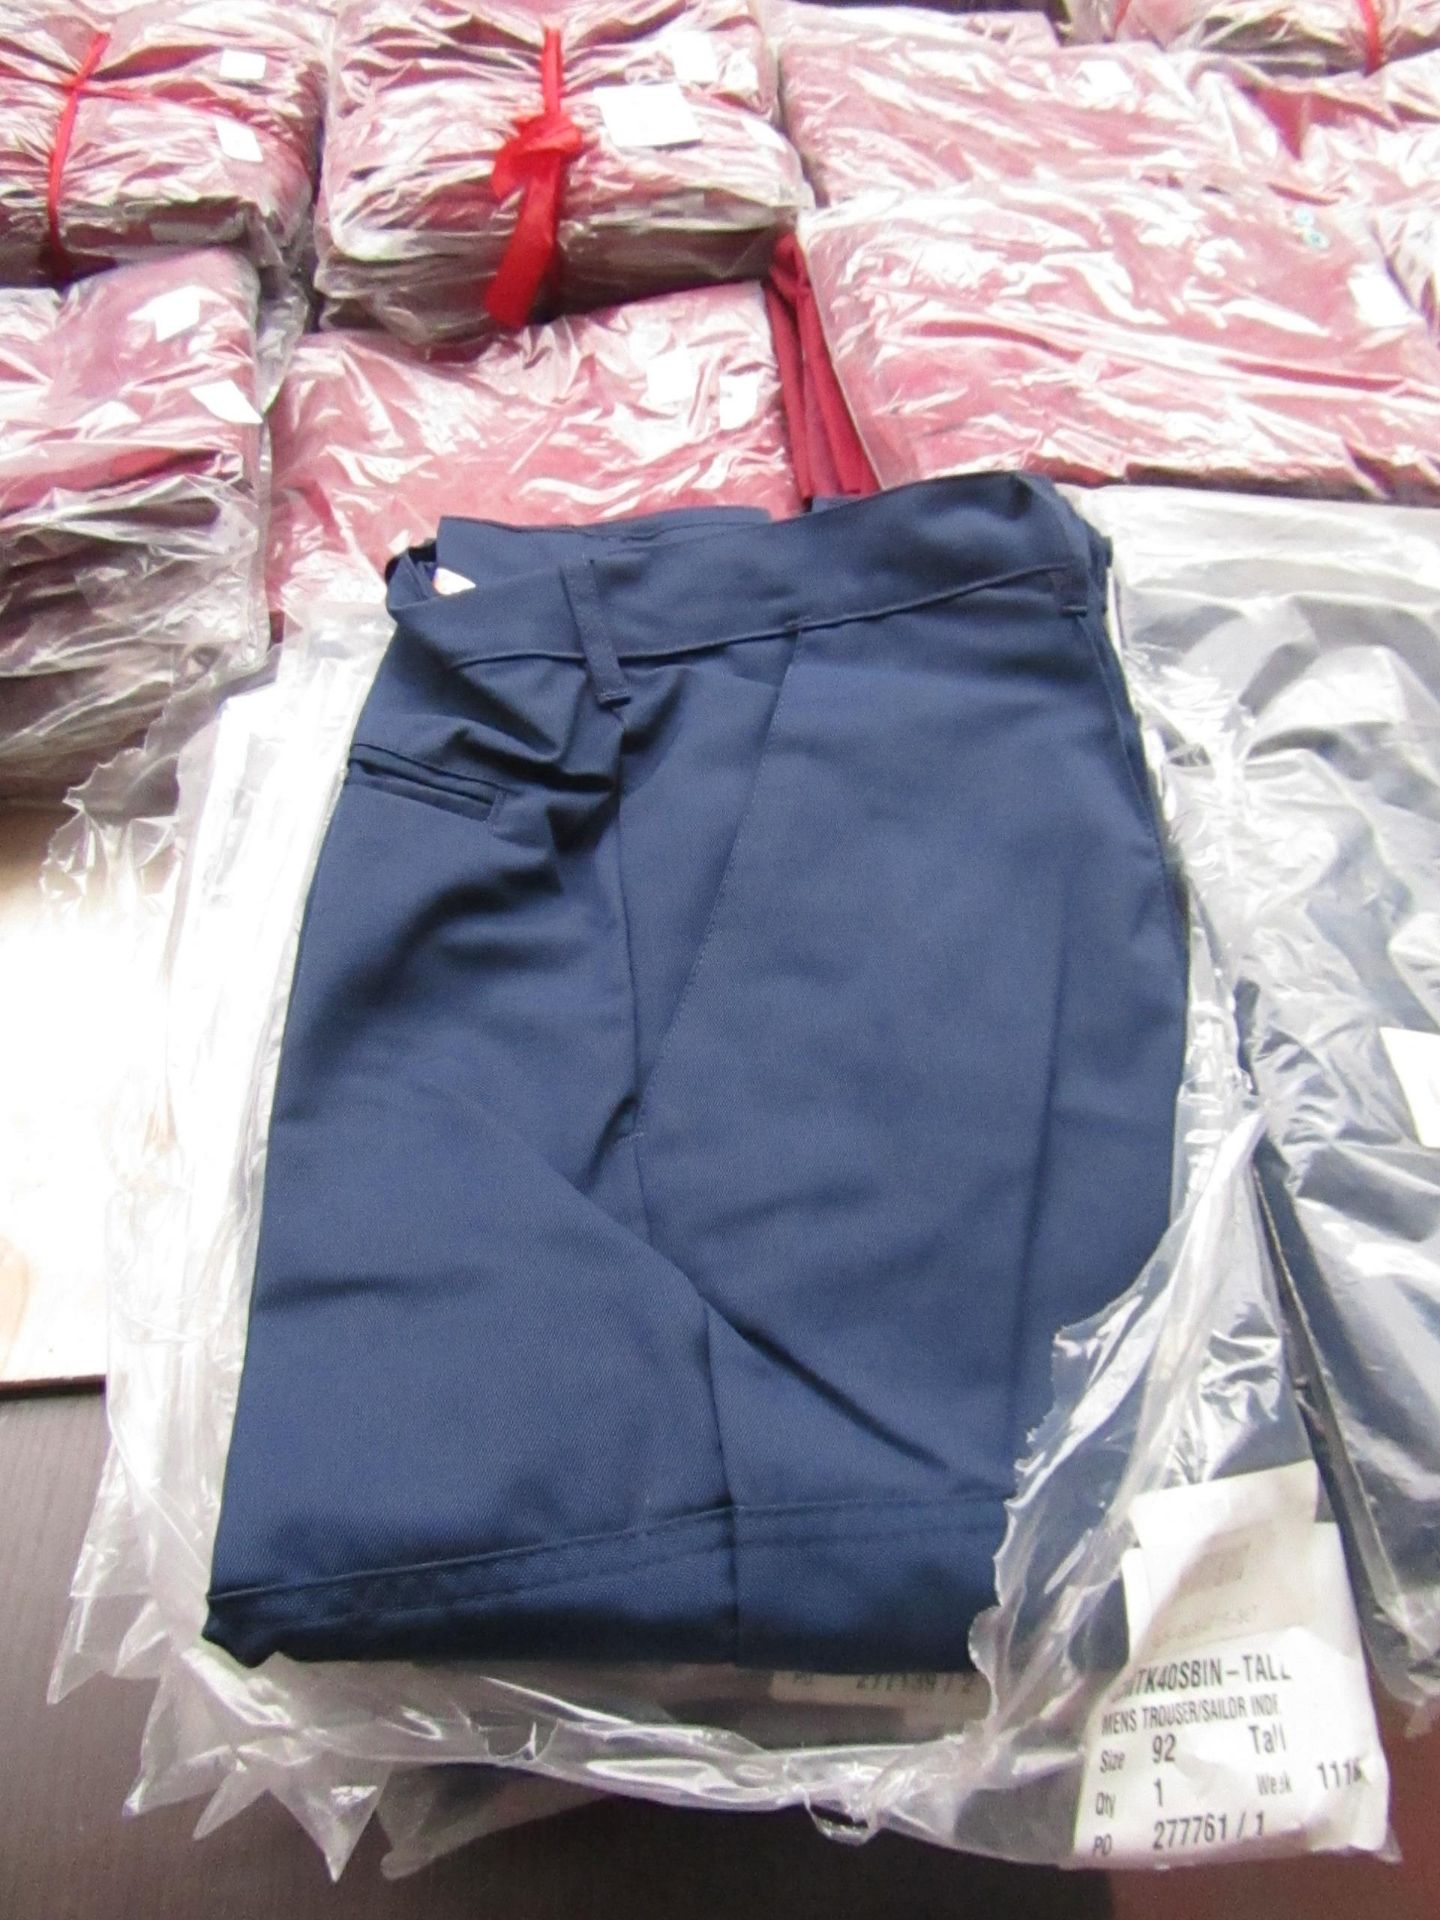 5 x Refuse trousers in navy,size 32R,new in packaging